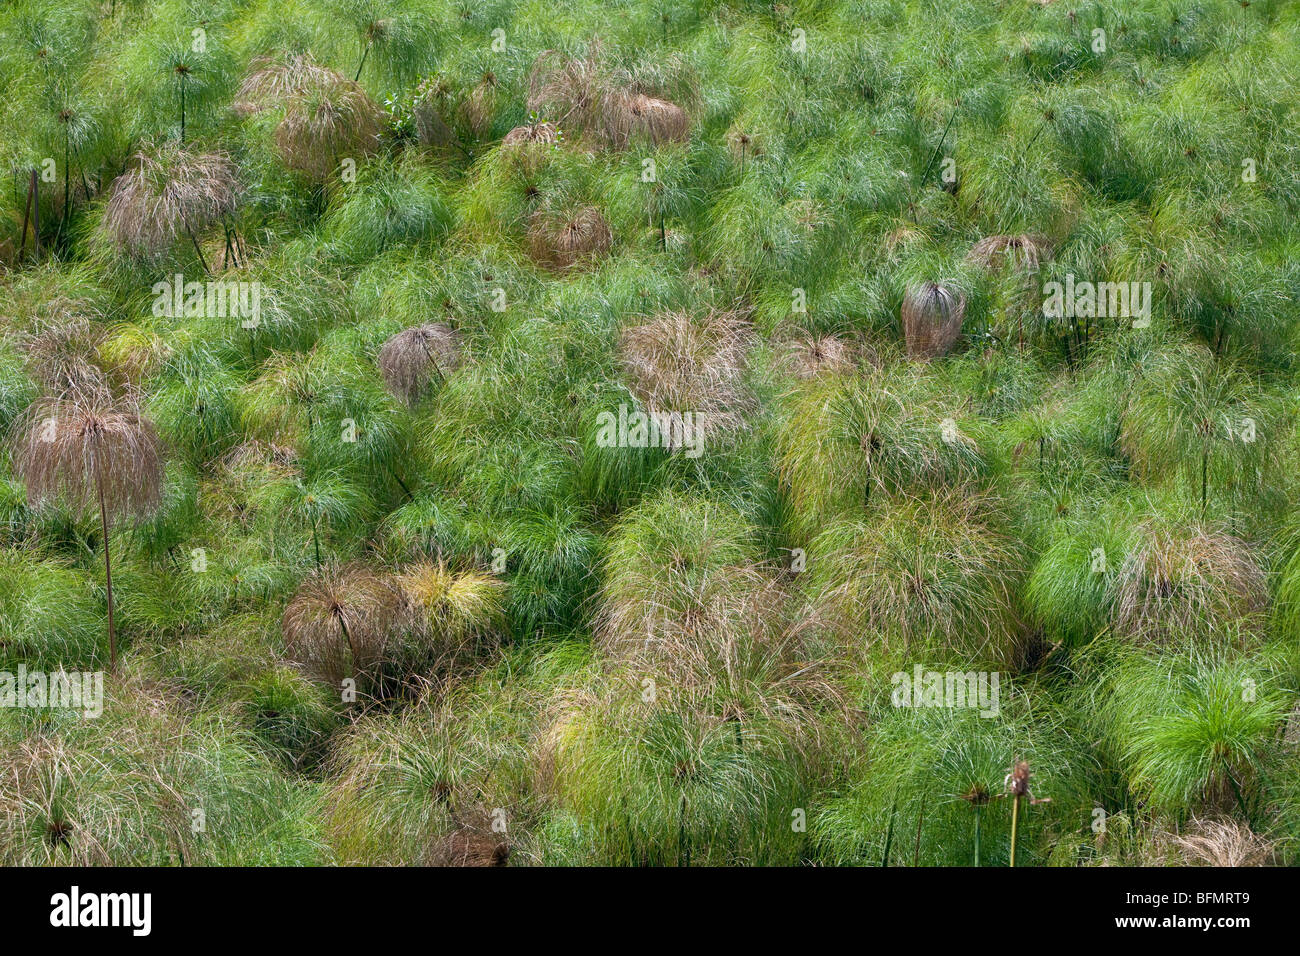 Kenya. Papyrus growing in a swamp fed by a freshwater spring near Lake Bogoria. Stock Photo